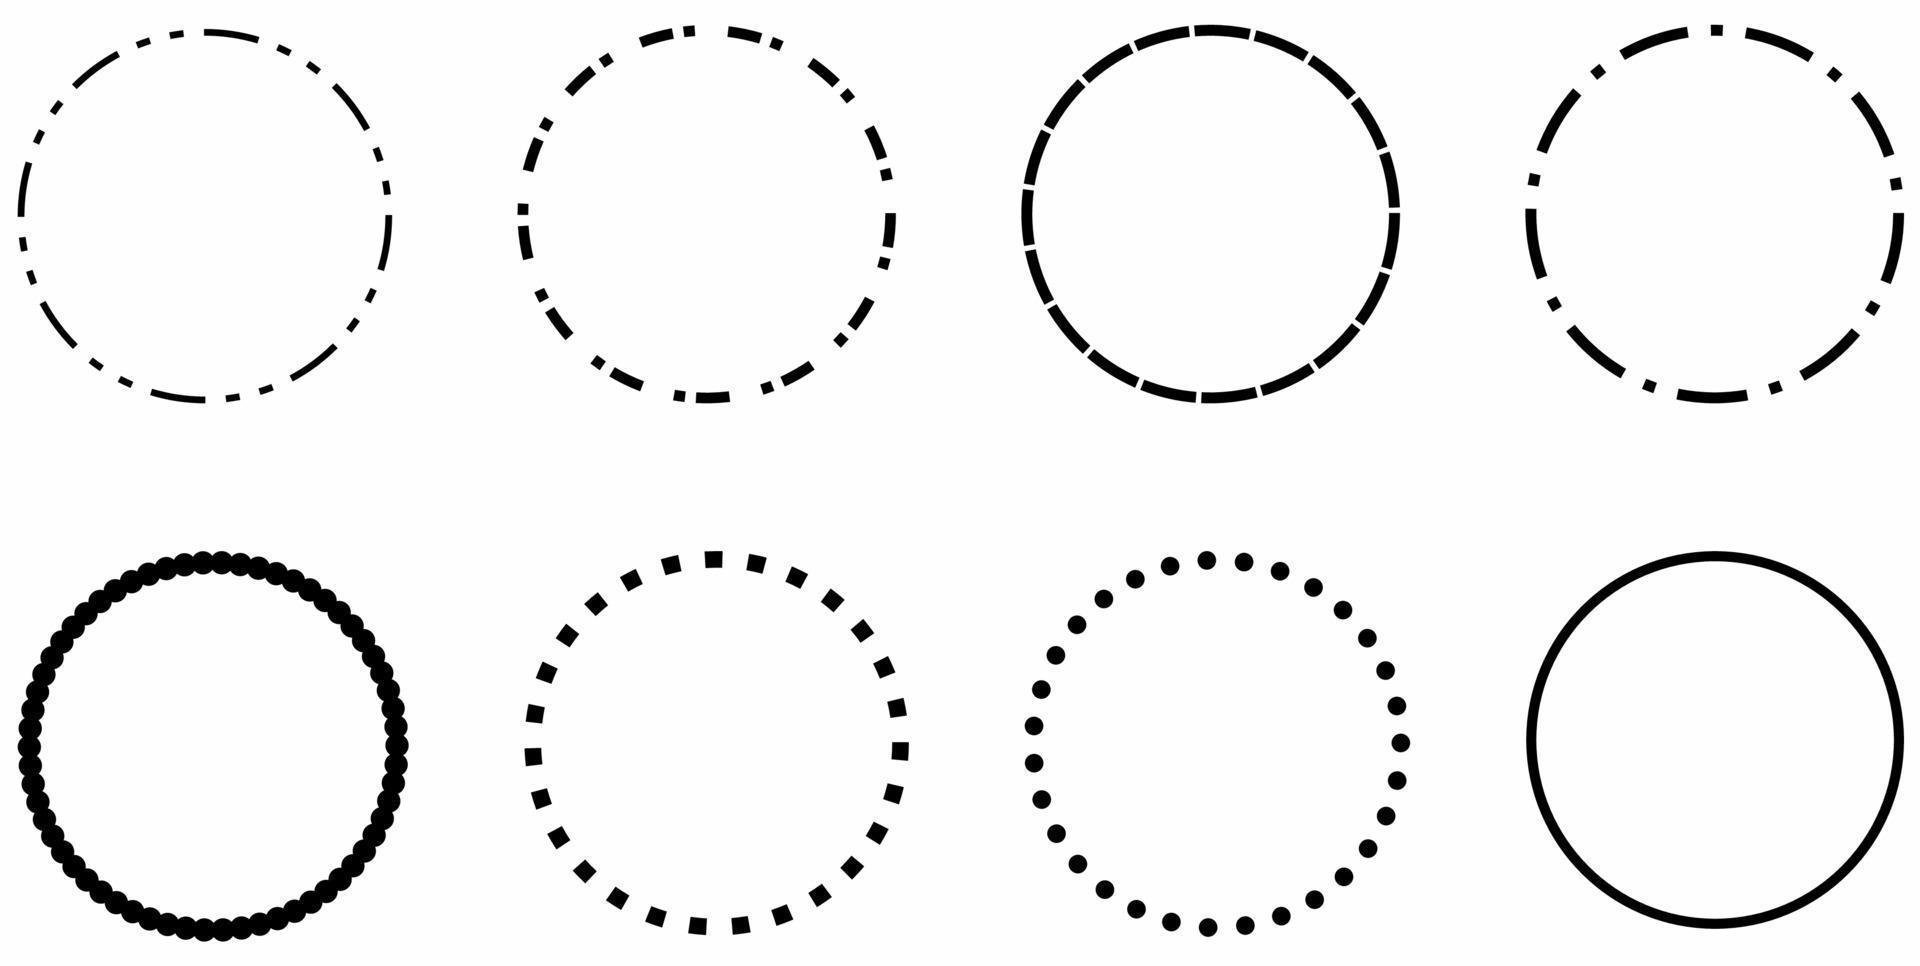 dash circle set isolated on white background vector